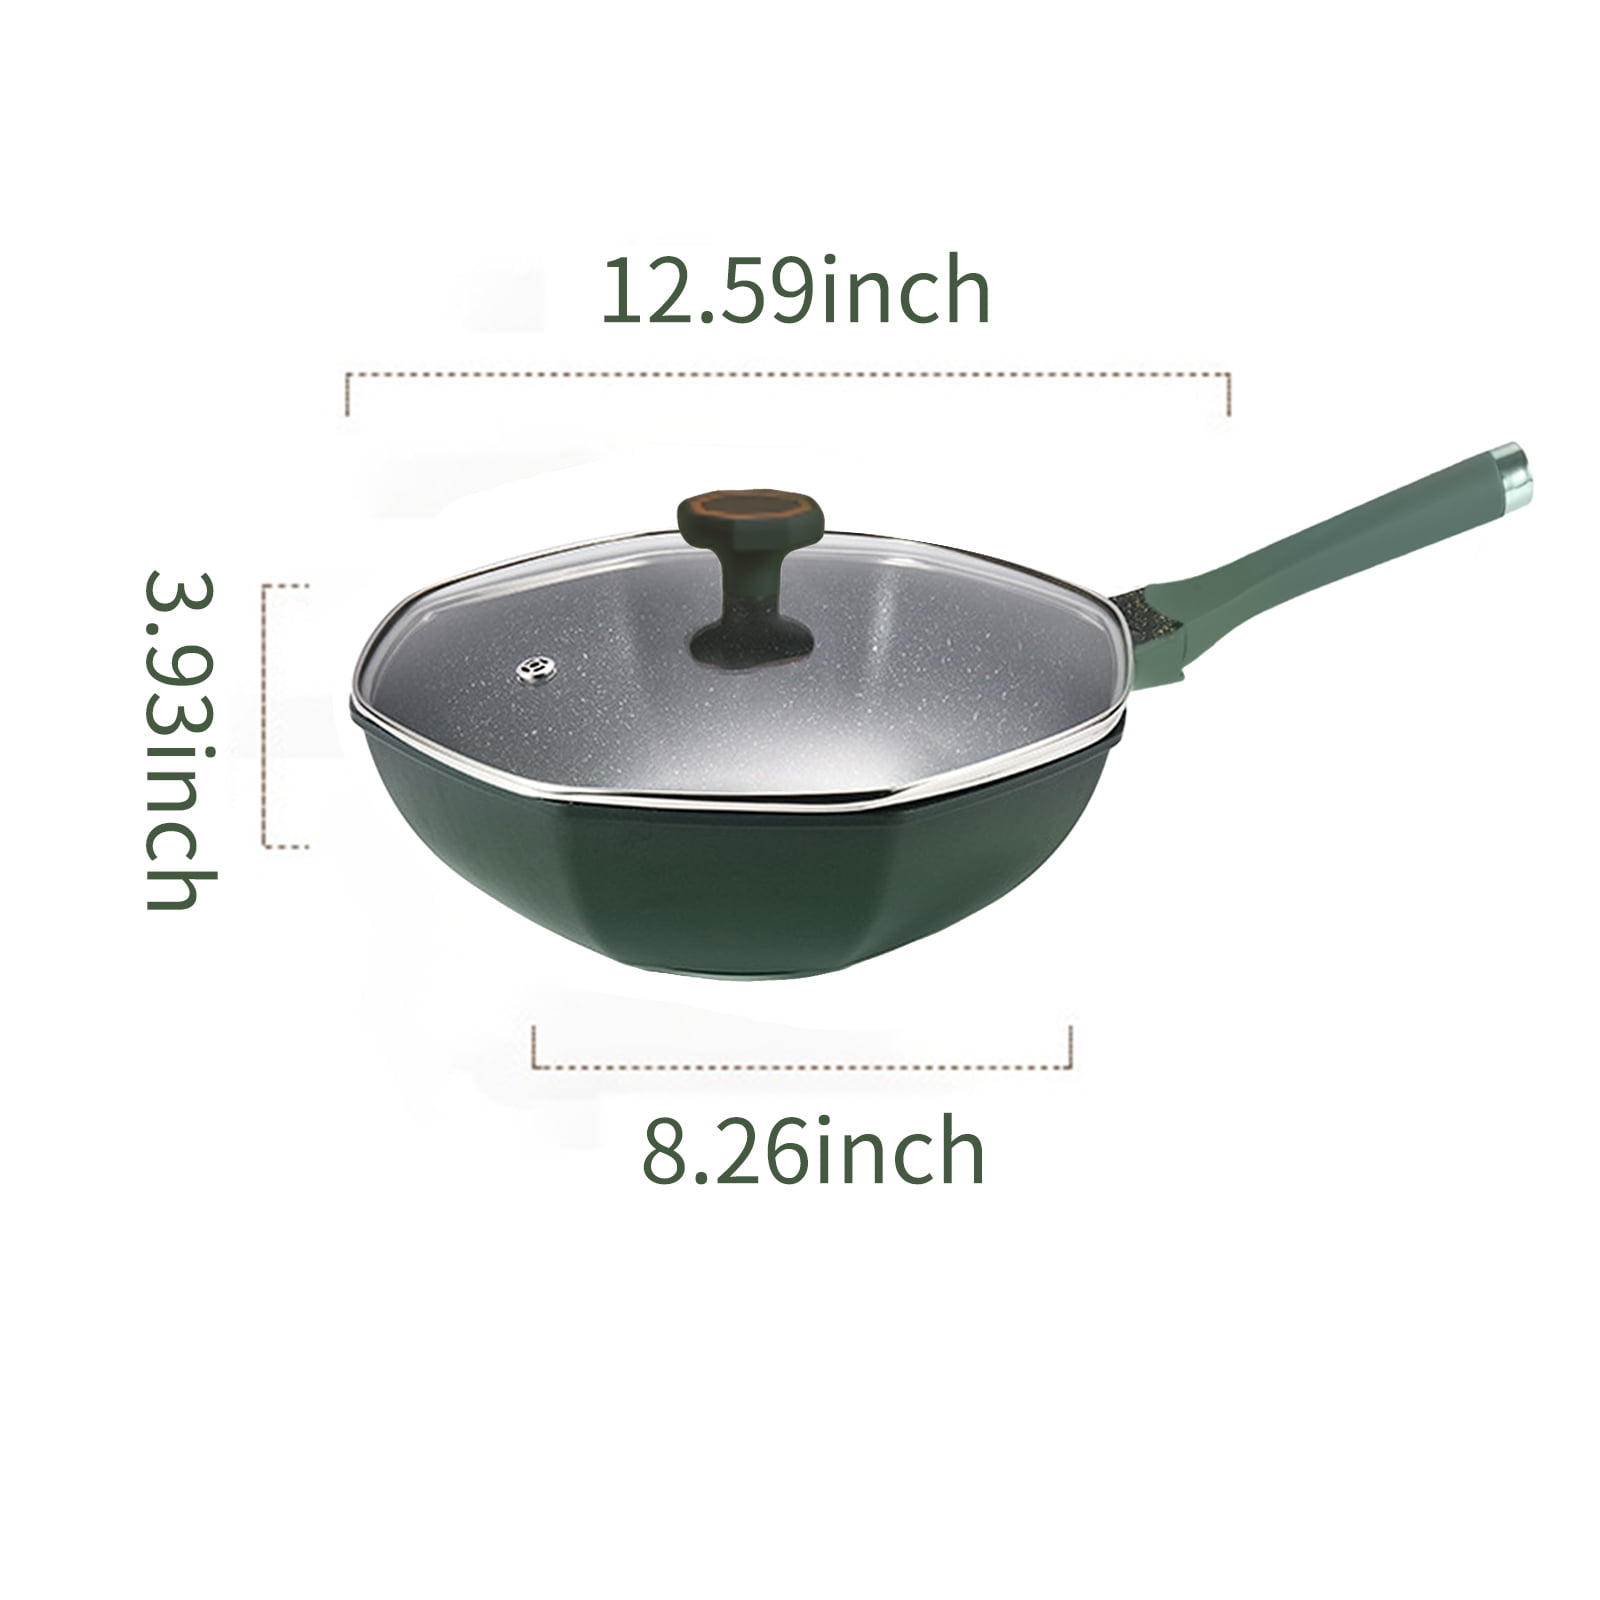 Mighty Rock Wok Pan Deep Stir Fry Pans Non Stick Wok Pan Carbon Steel Pan Wooden Detachable Handle Flat Bottom for Induction GAS Halogen Stoves 11 in